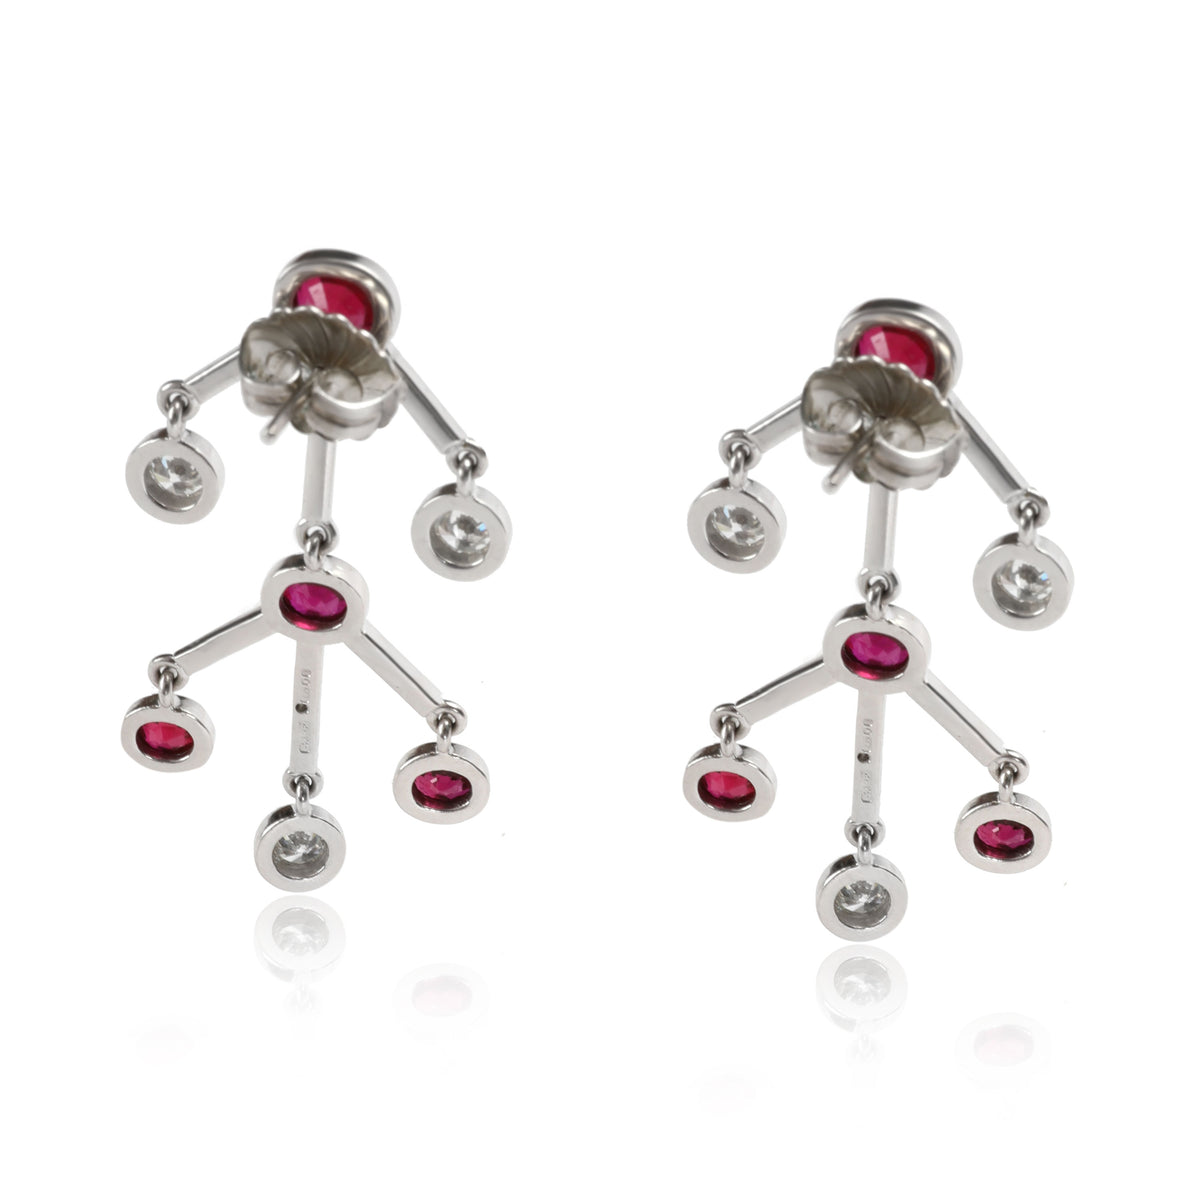 Ruby and Diamond Earrings in 18KT White Gold